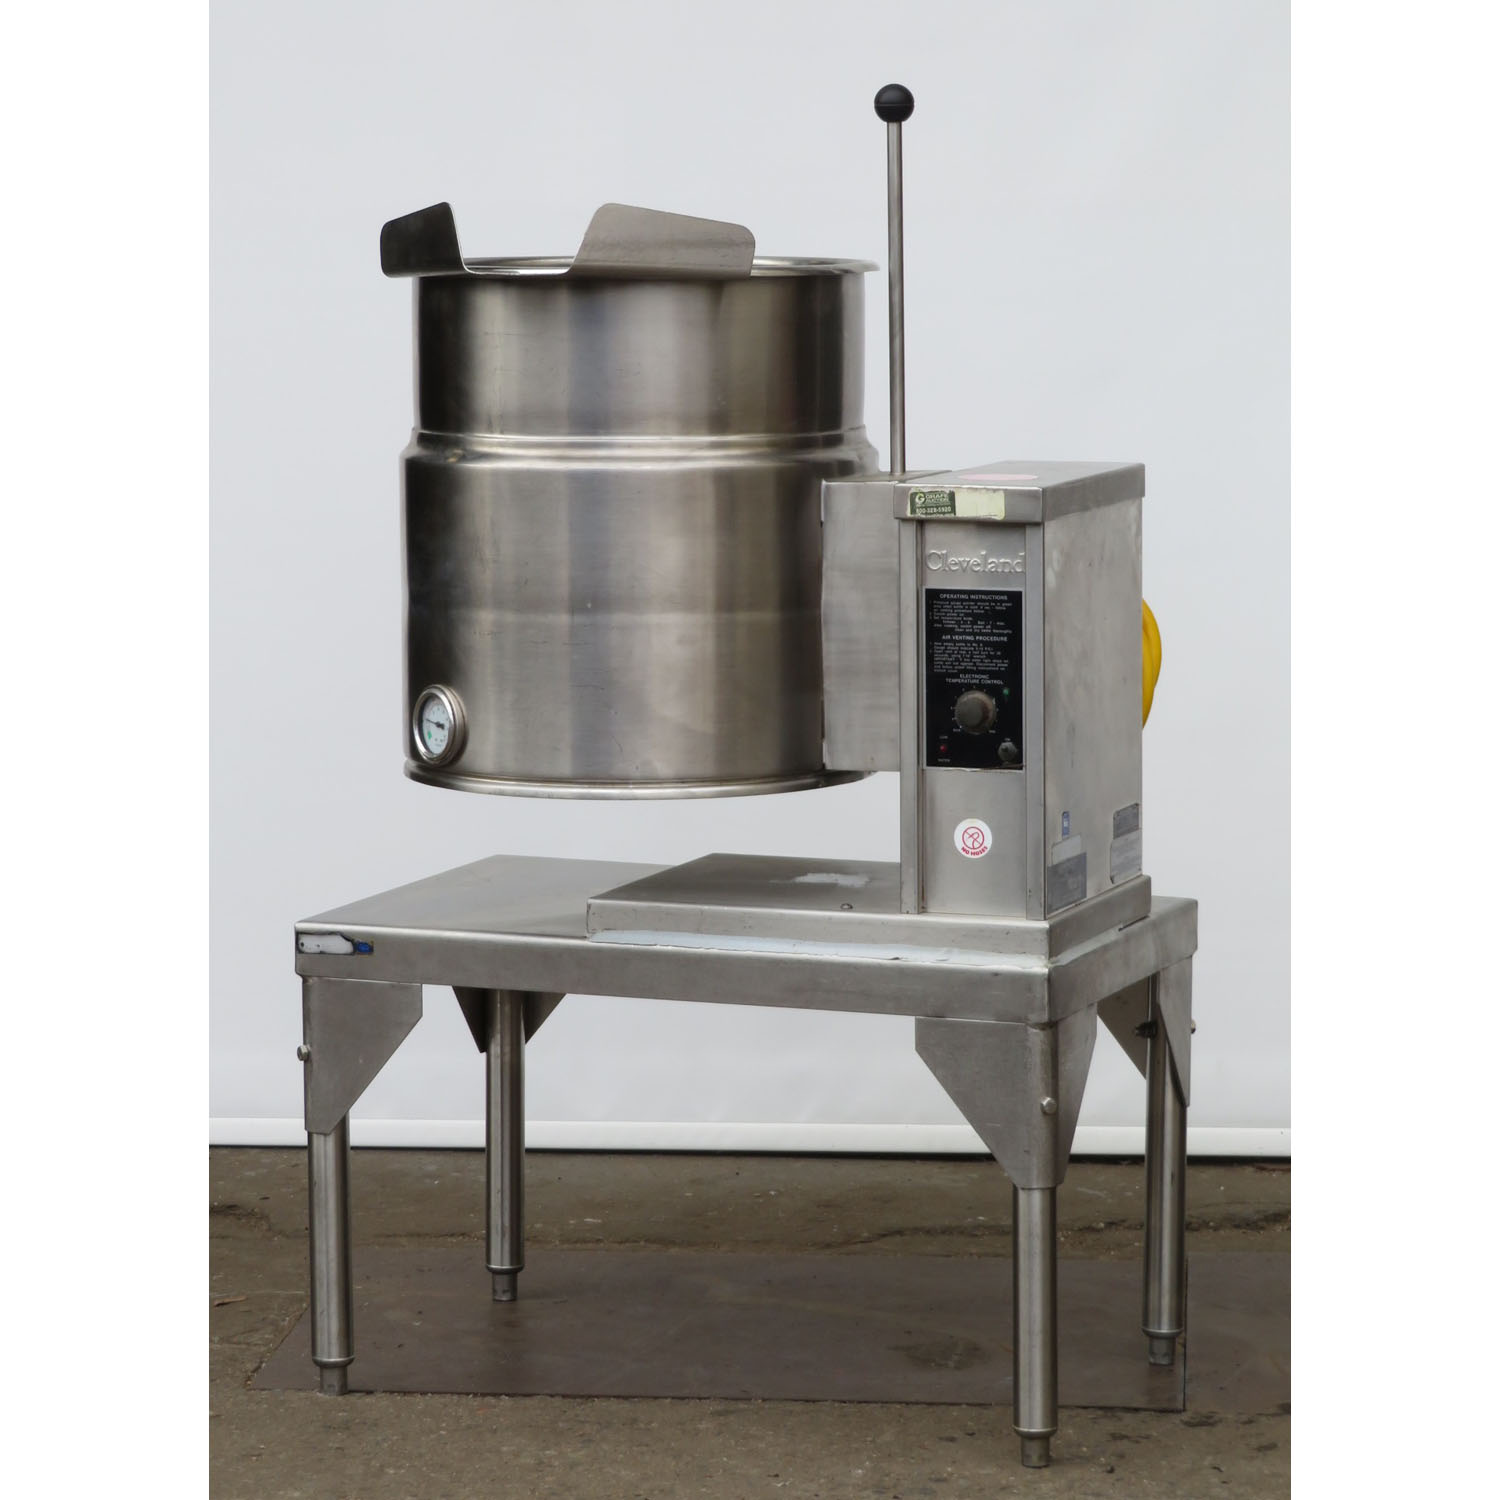 Cleveland KET-12T 12 Gallon Electric Tilt Kettle, Used Great Condition